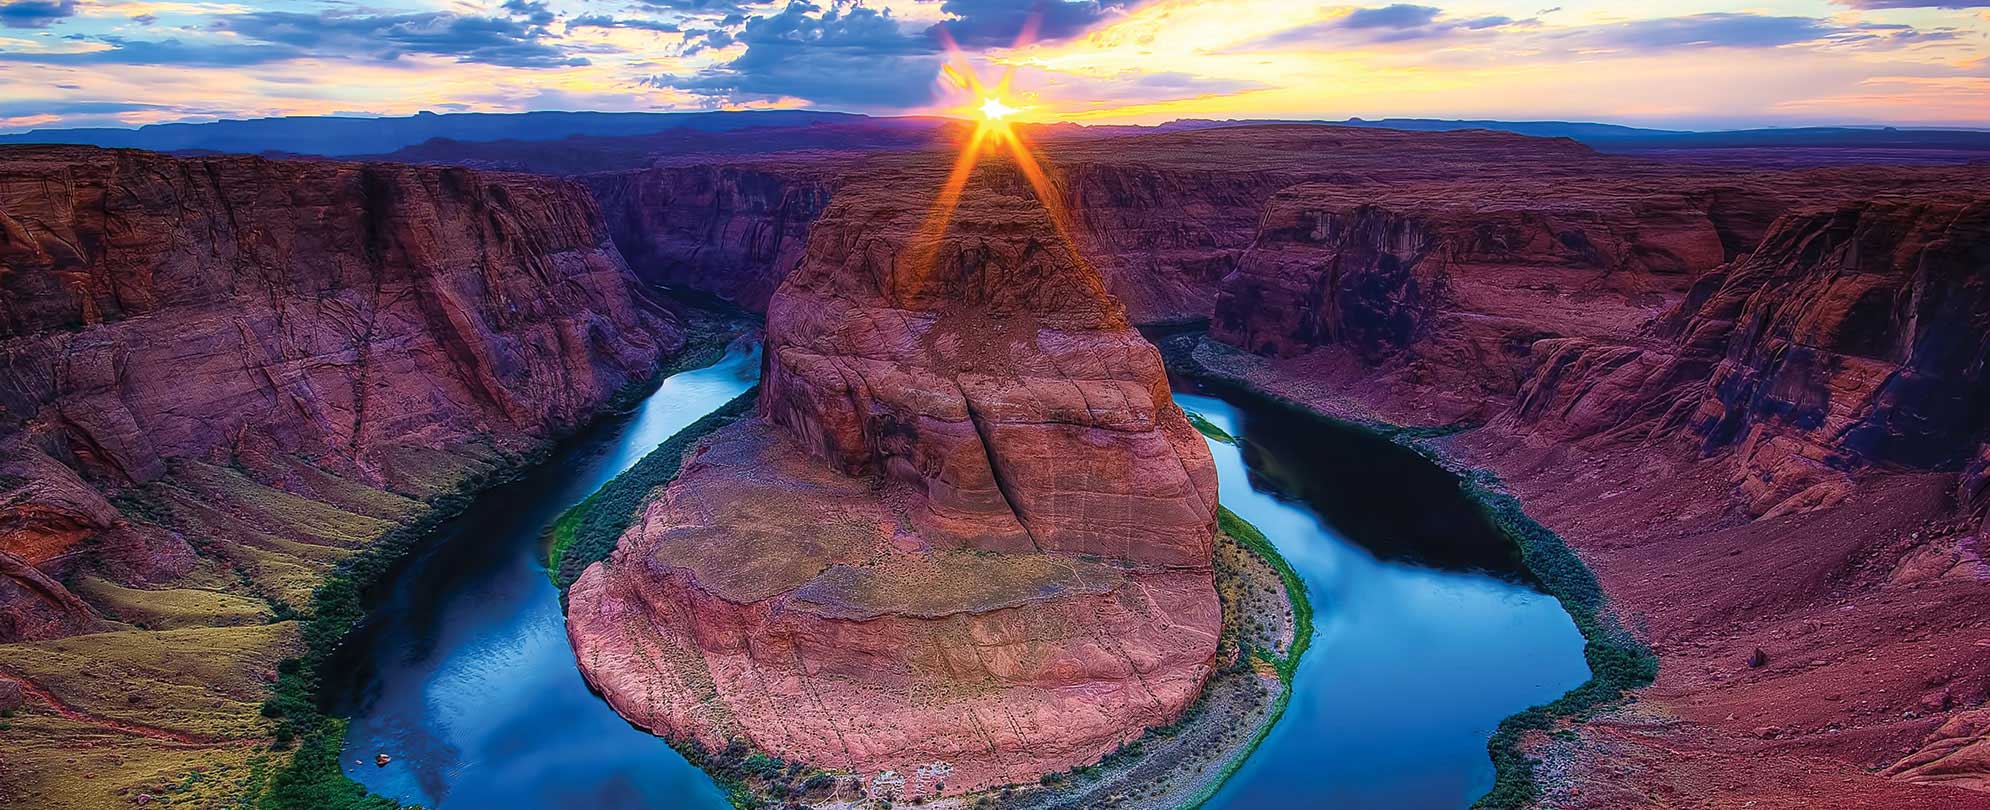 The sun sets over the Grand Canyon and Colorado River in Arizona during a national park vacation